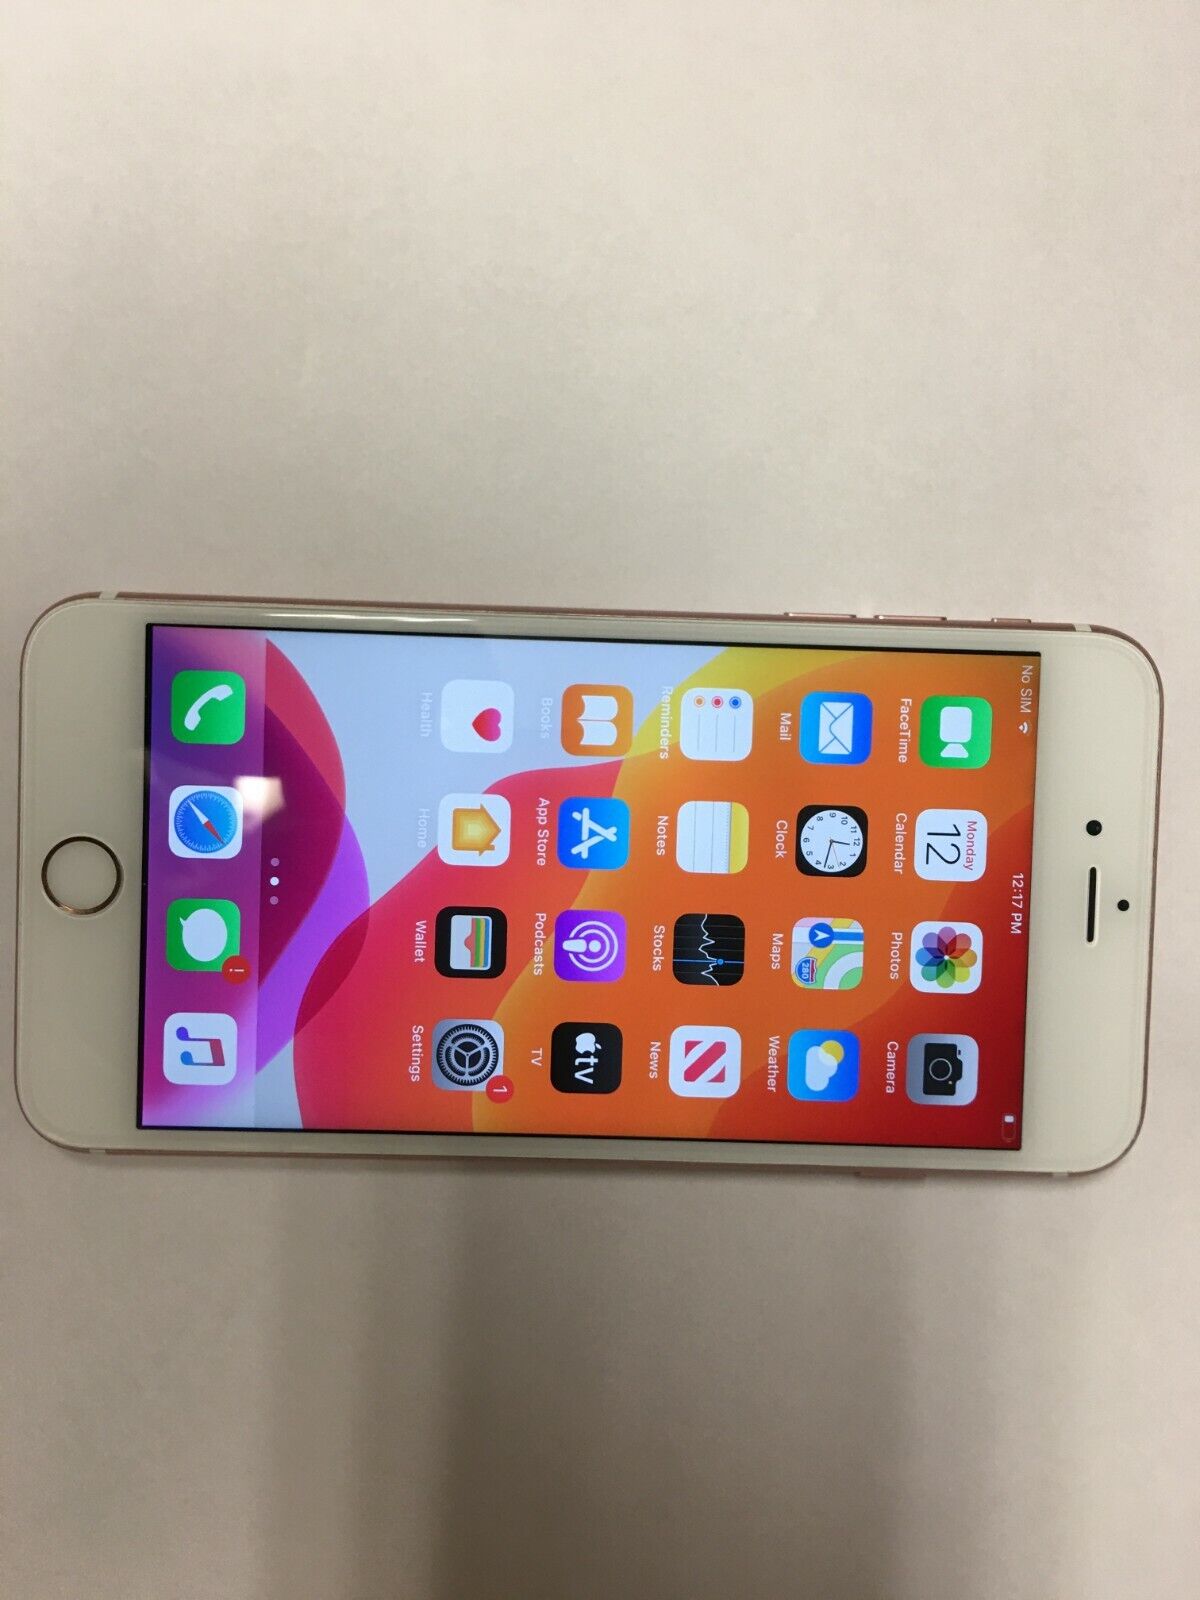 Apple iPhone 6s plus  - 64 GB -  rose gold  AT&T great condition